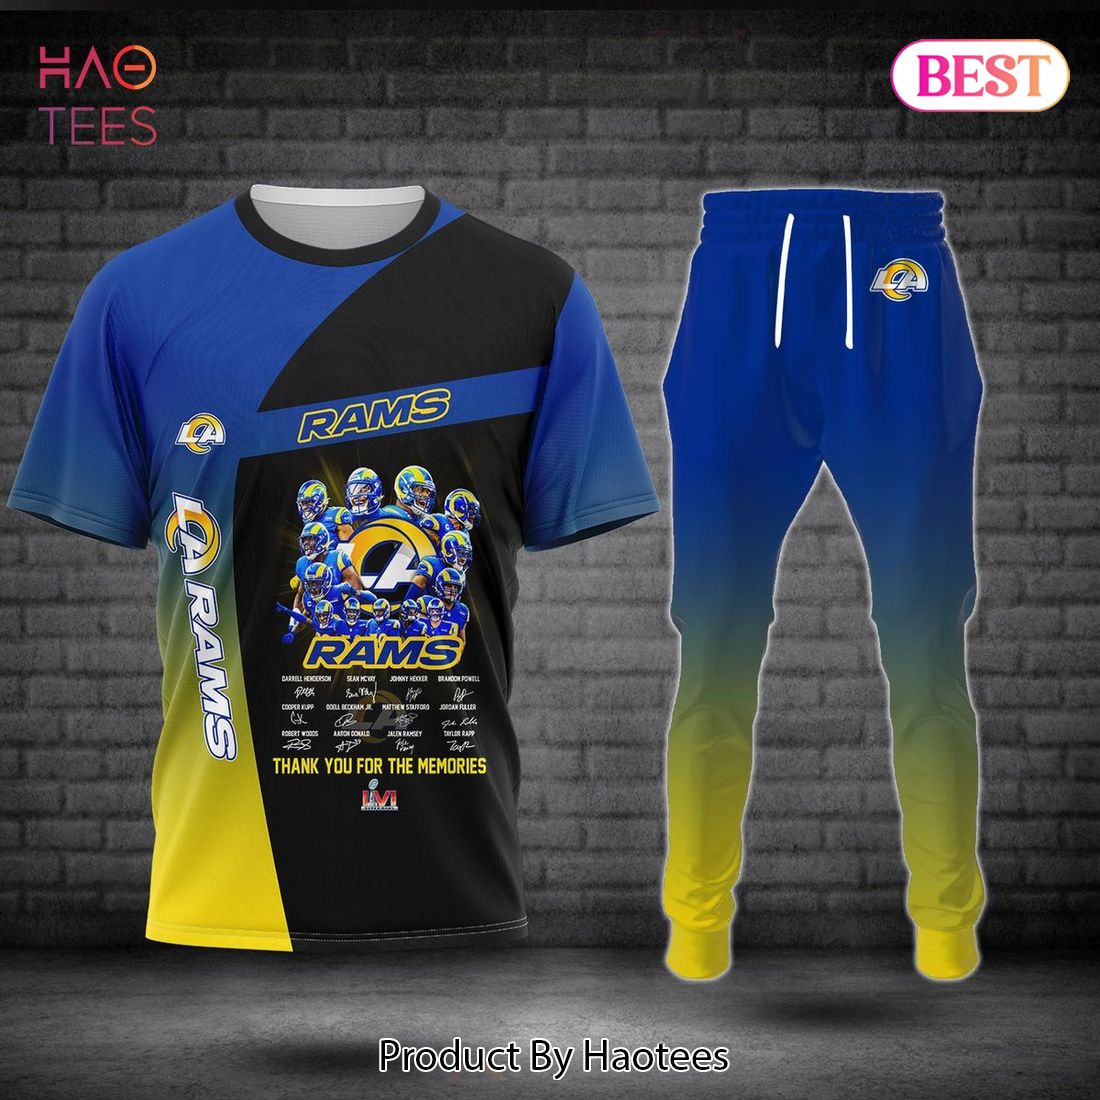 BEST RAMS Luxury Brand T-Shirt And Pants Limited Edition